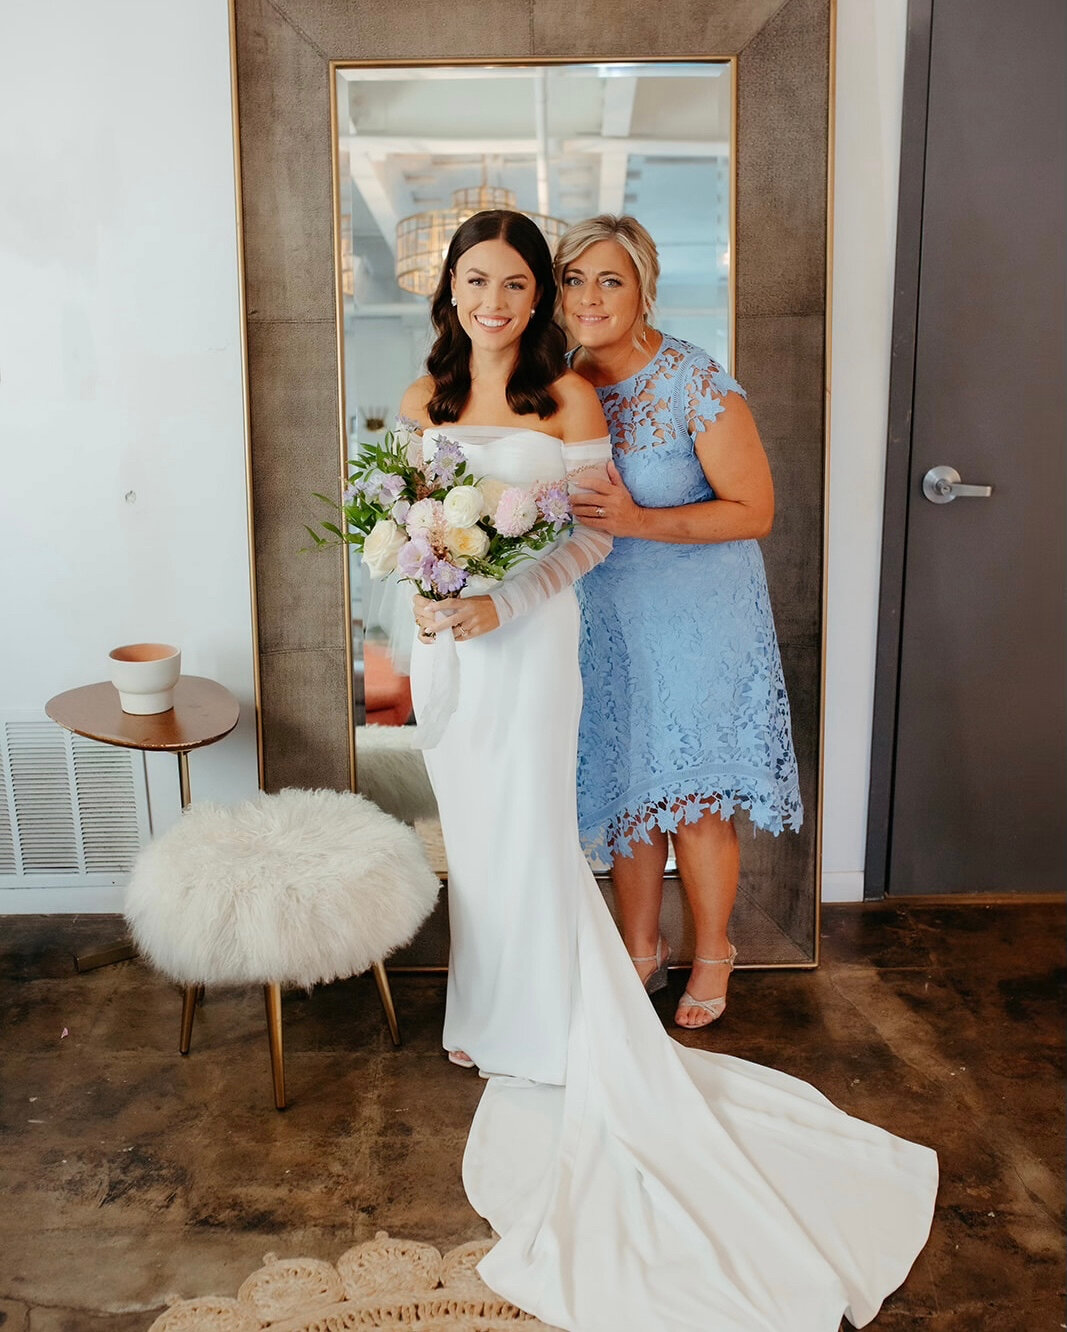 A mother is your built in best friend! Happy Mother&rsquo;s Day to all the amazing moms out there. Today is your day 💘 ​​​​​​​​​
📸: 
@chelseagreen.photography
@honeyrosephoto
@elisabethannephoto
@brookecolephoto
@hurberthuyphotography